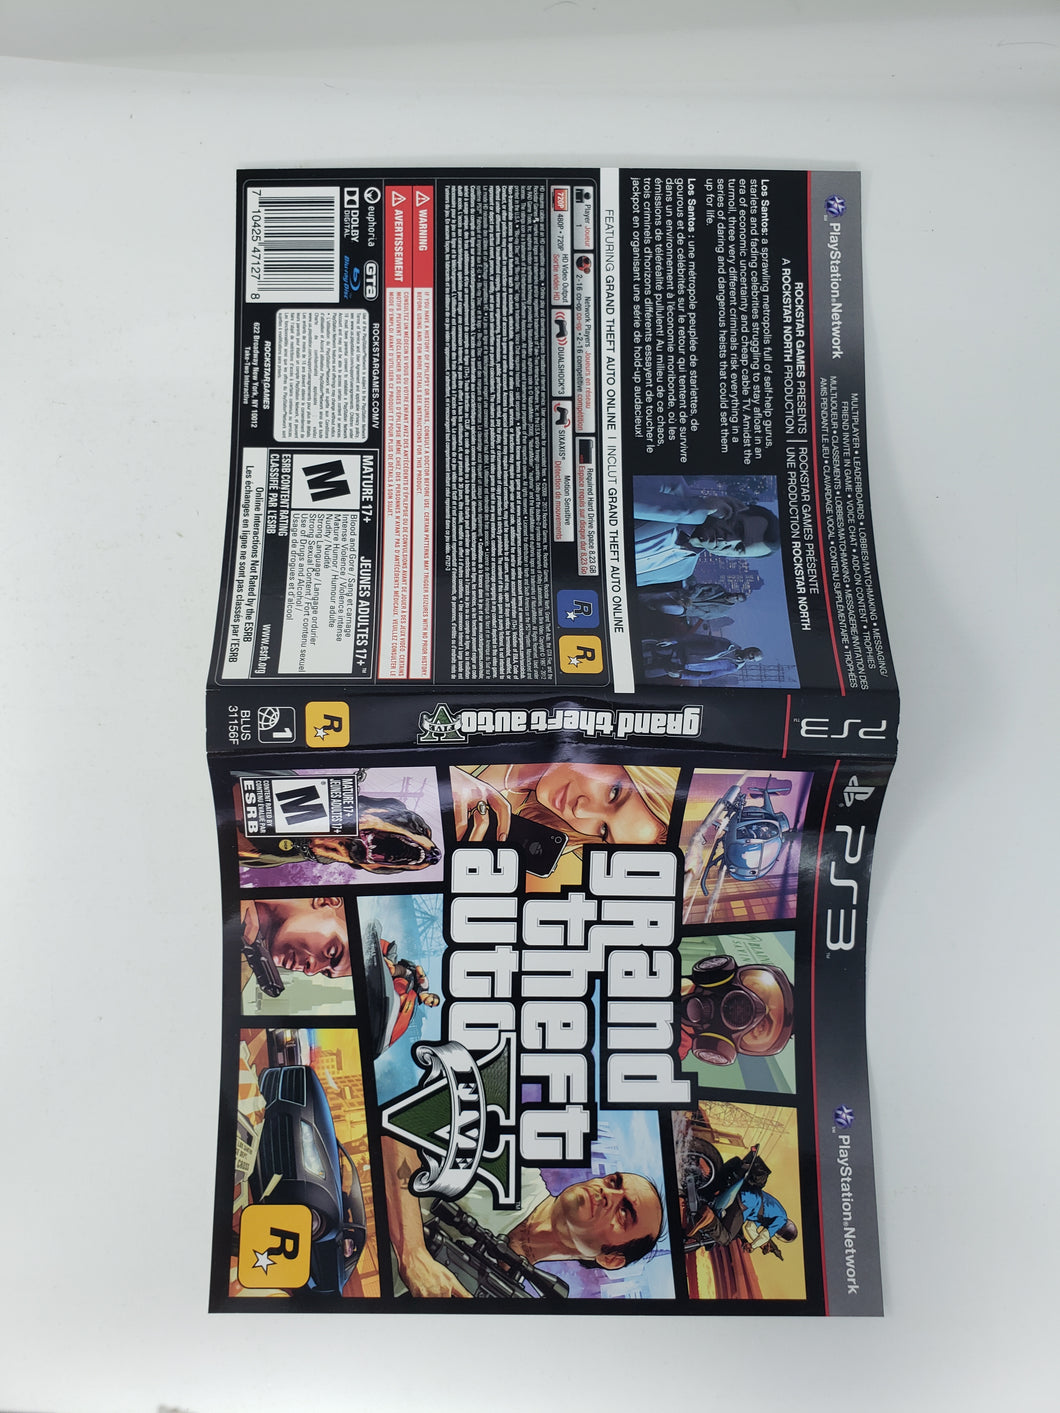 Grand Theft Auto V [Cover art] - Playstation 3 | PS3